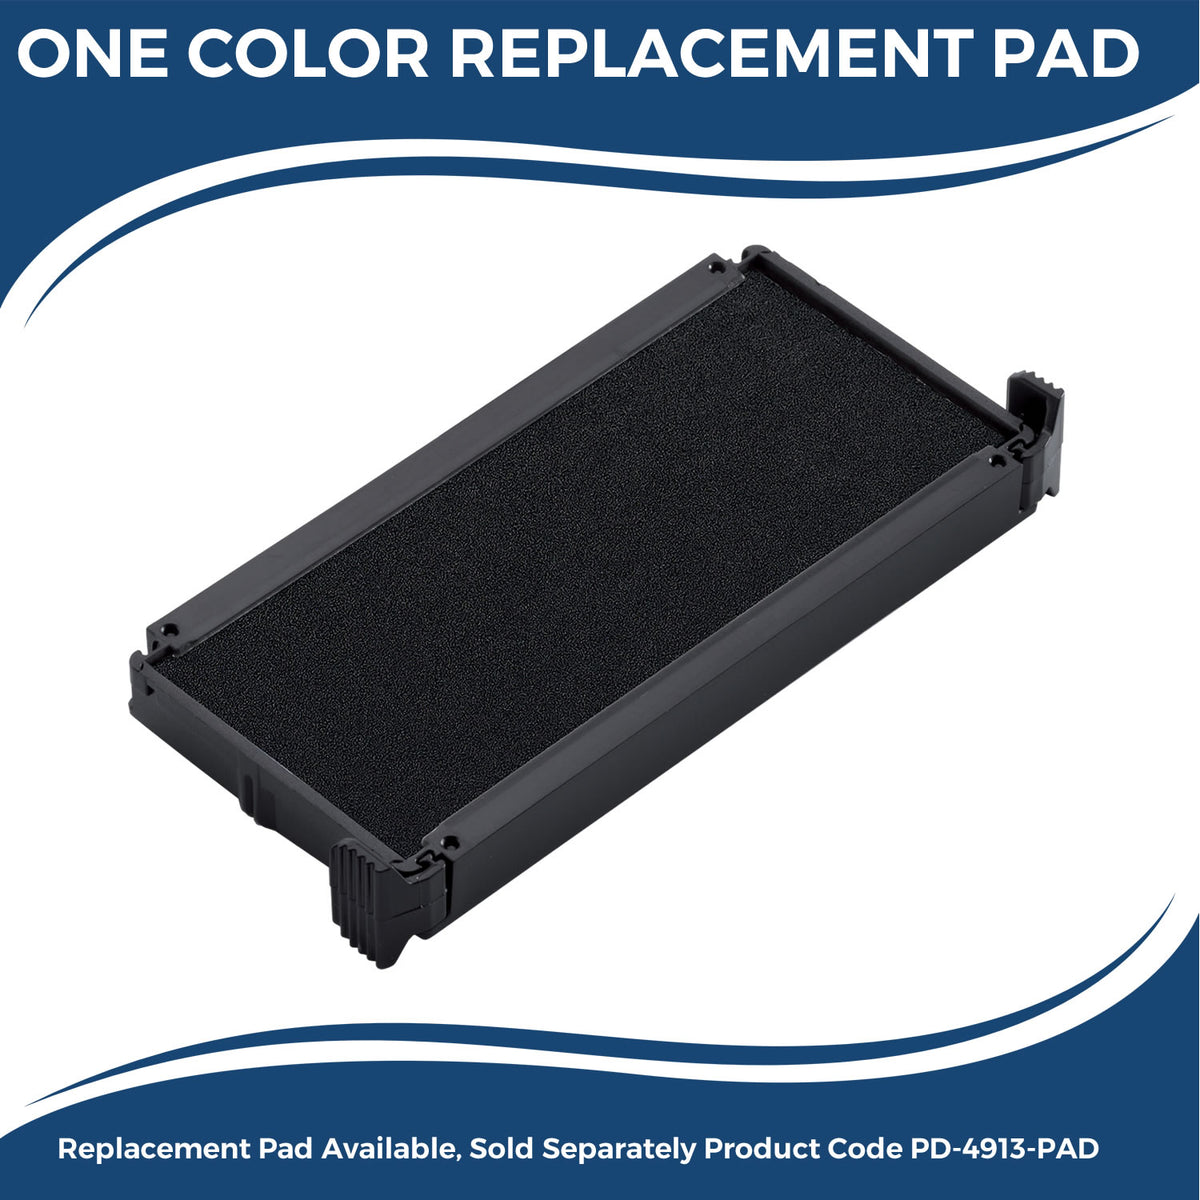 Large Self Inking Copy For Your Information Stamp 4116S Large Replacment Pad